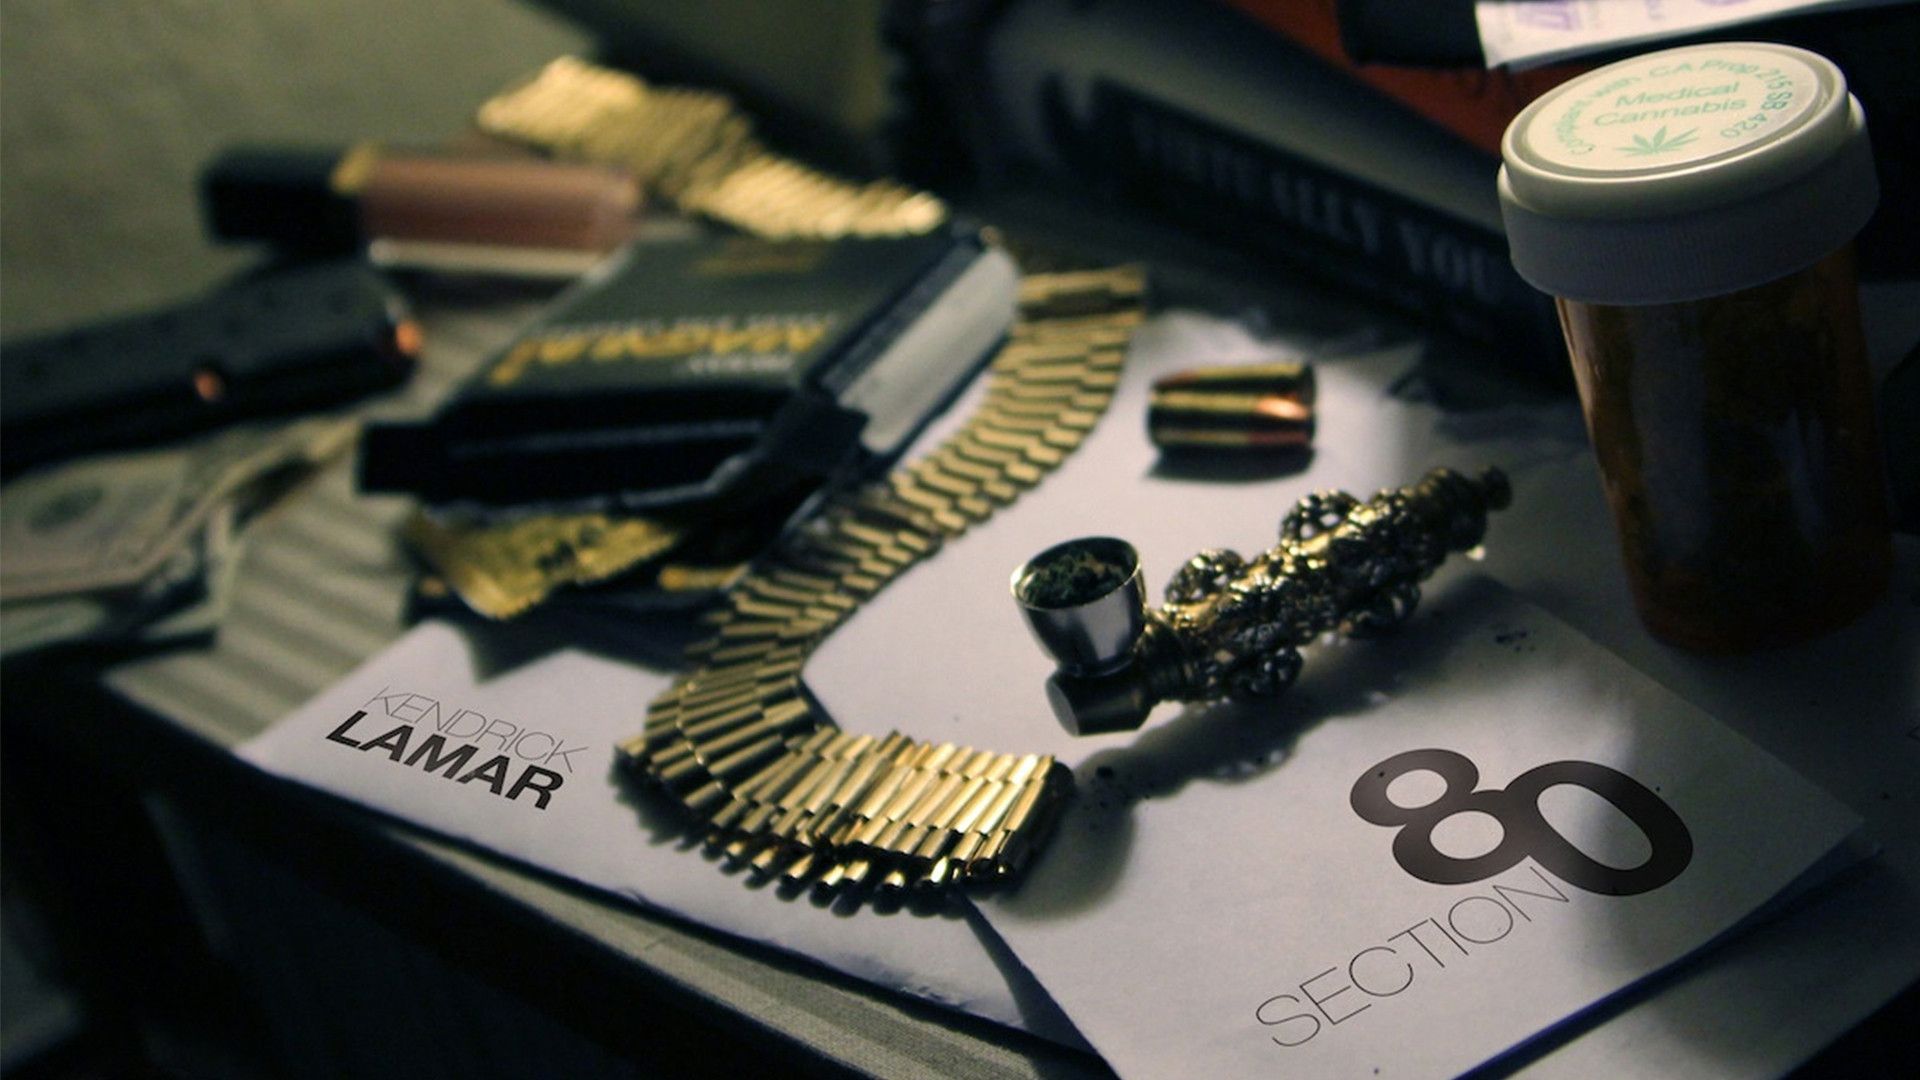 Section 80 tracklist